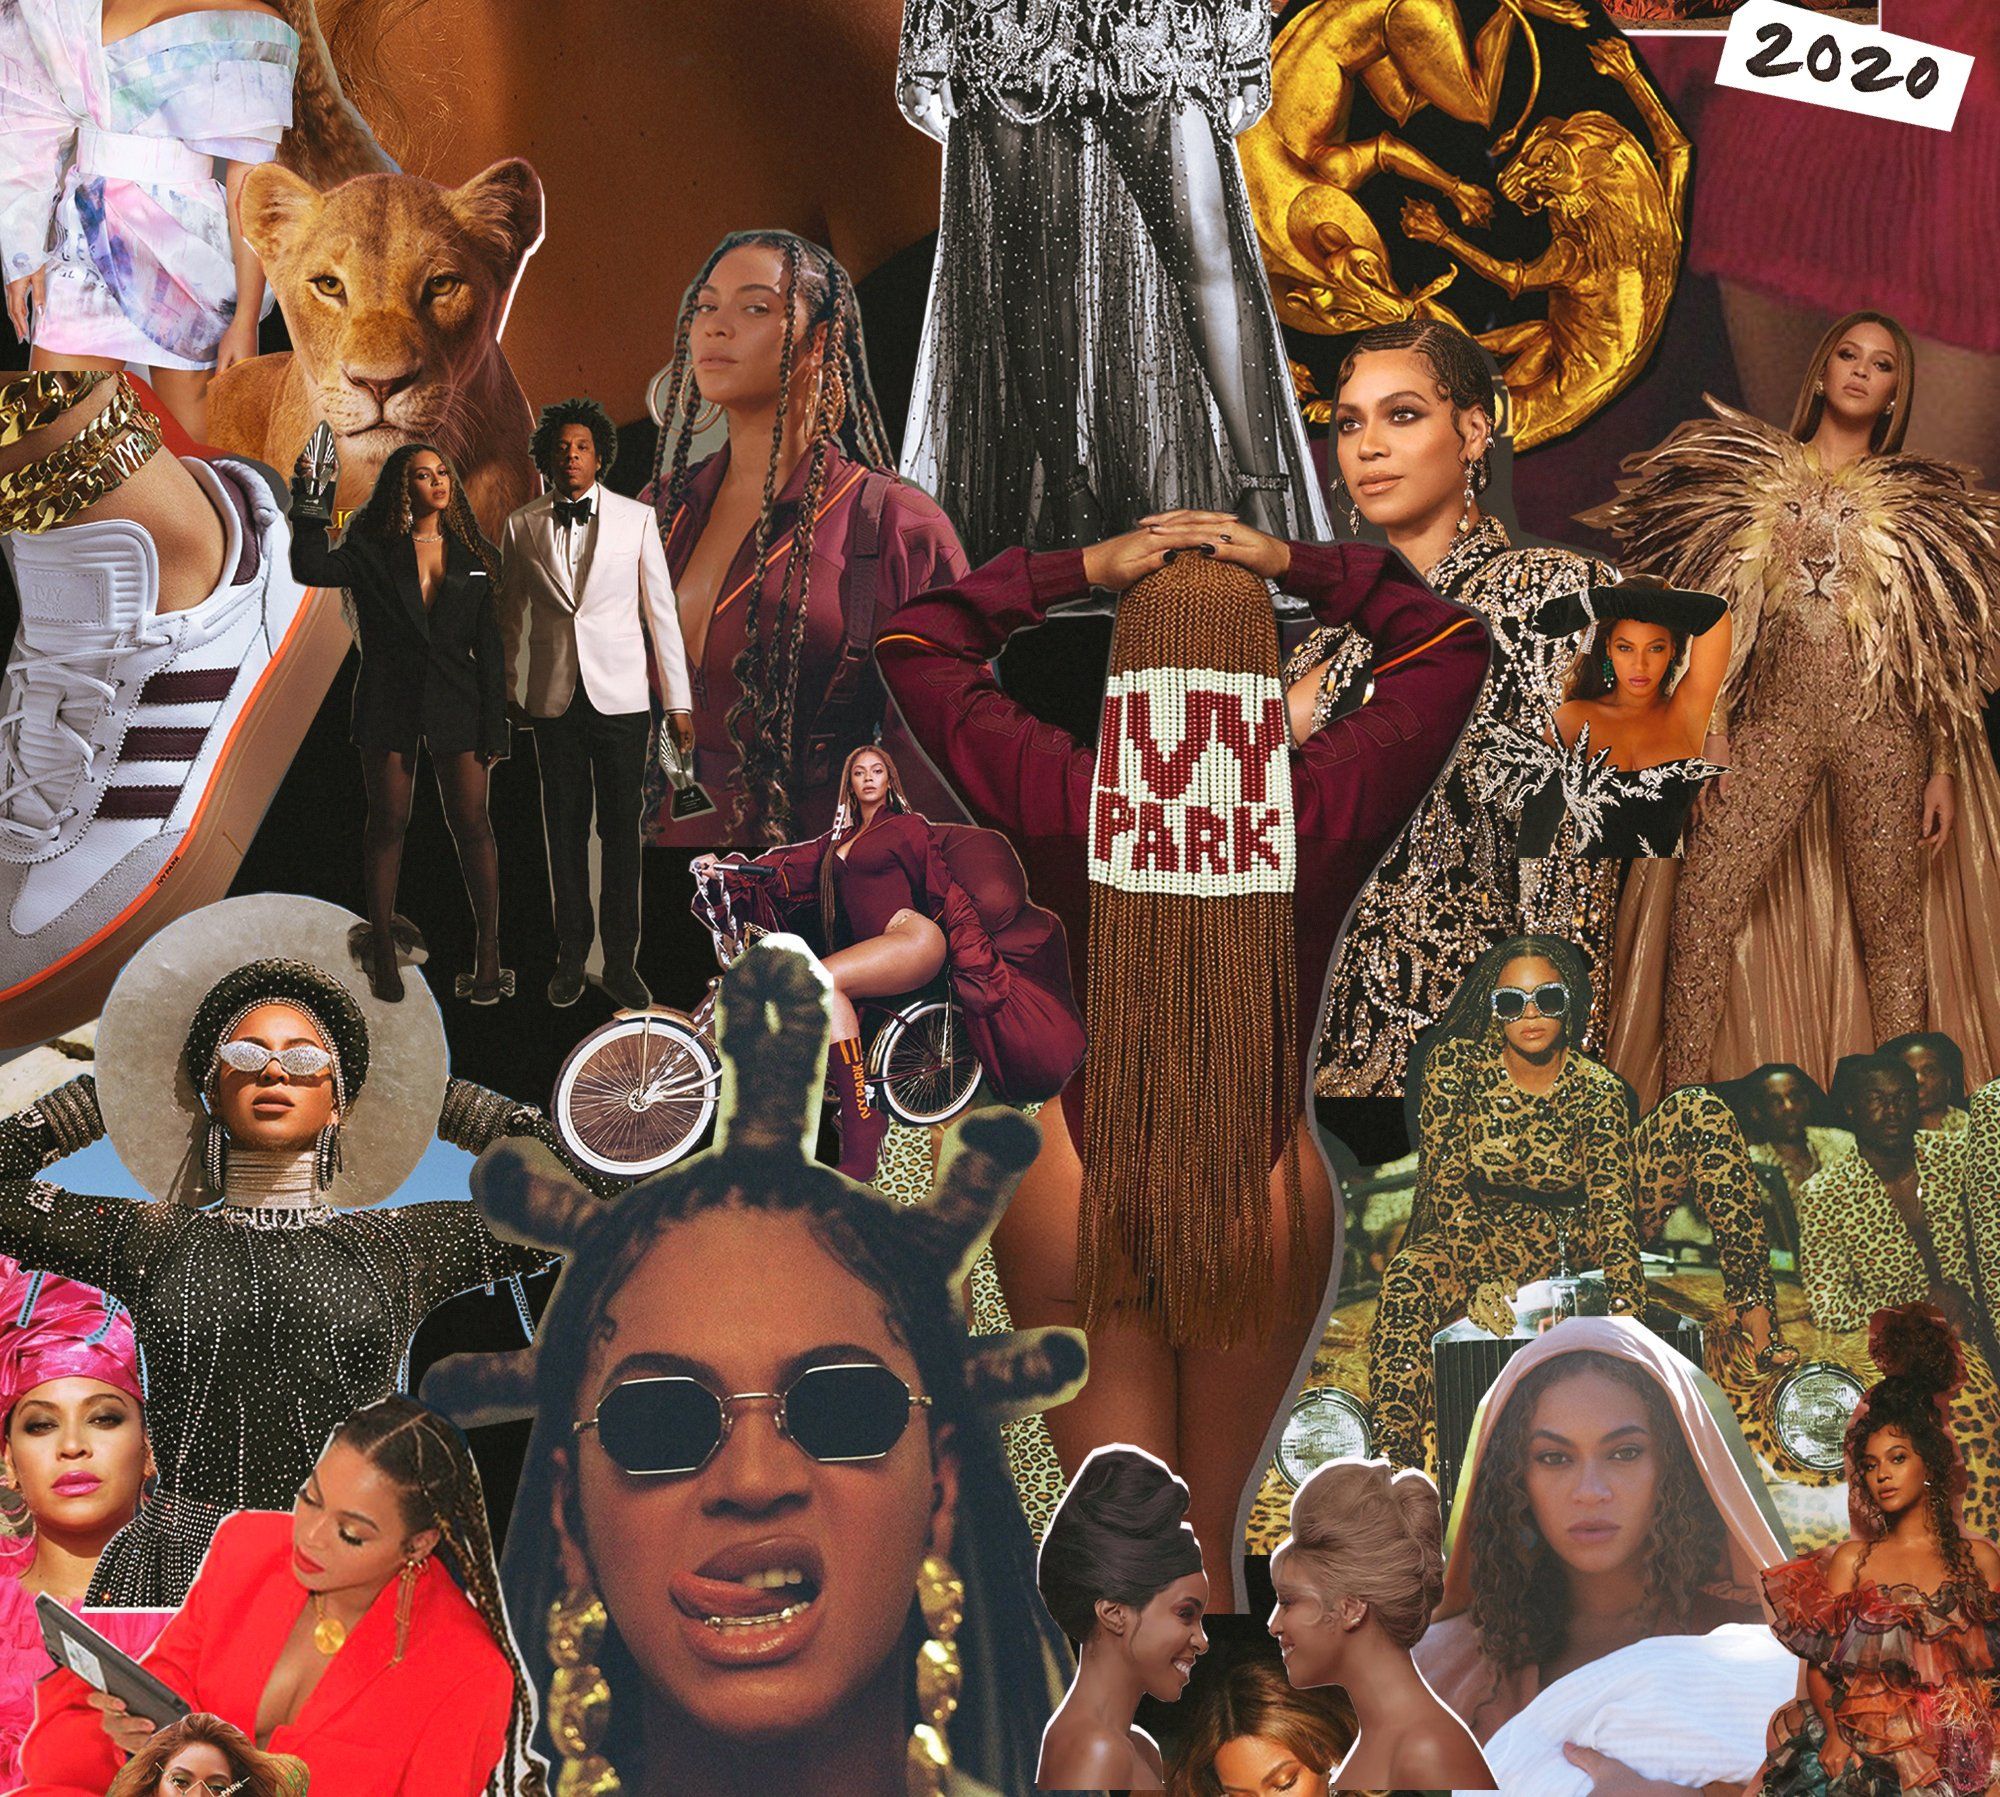 A collage of Beyoncé's outfits from the 2020 Grammys - Beyonce